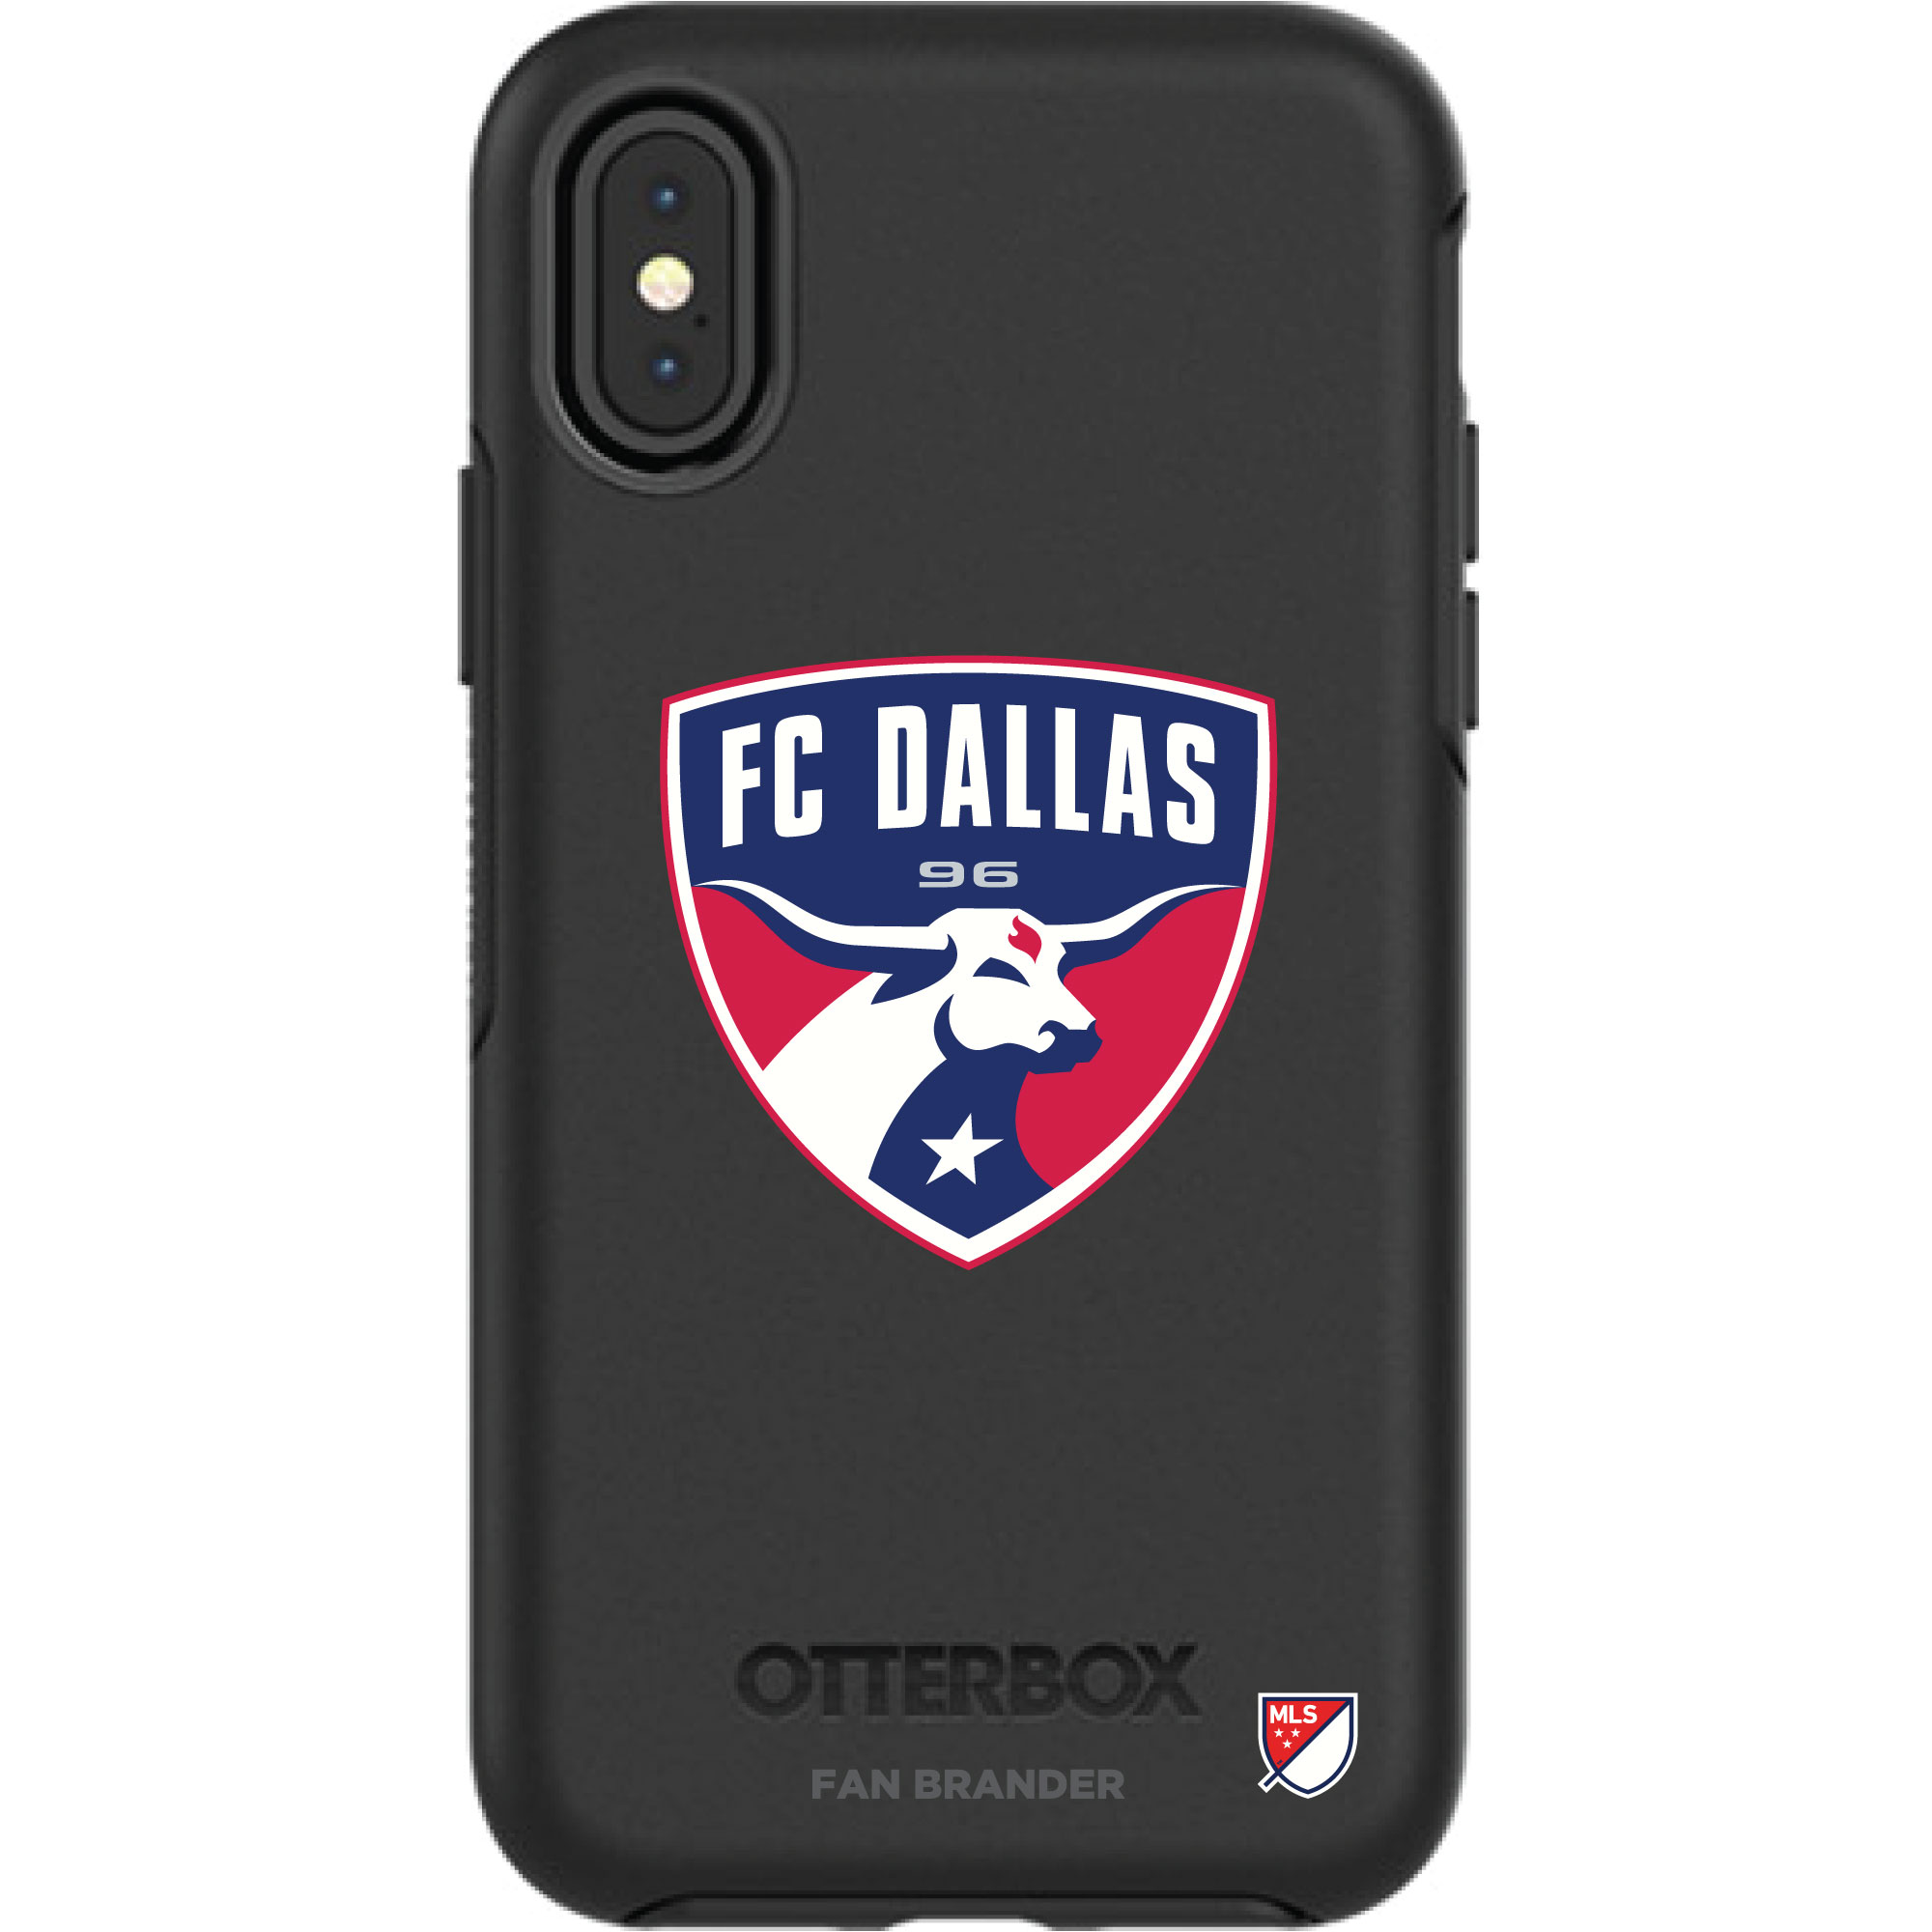 OtterBox FC Dallas iPhone Symmetry Series Case - image 1 of 4